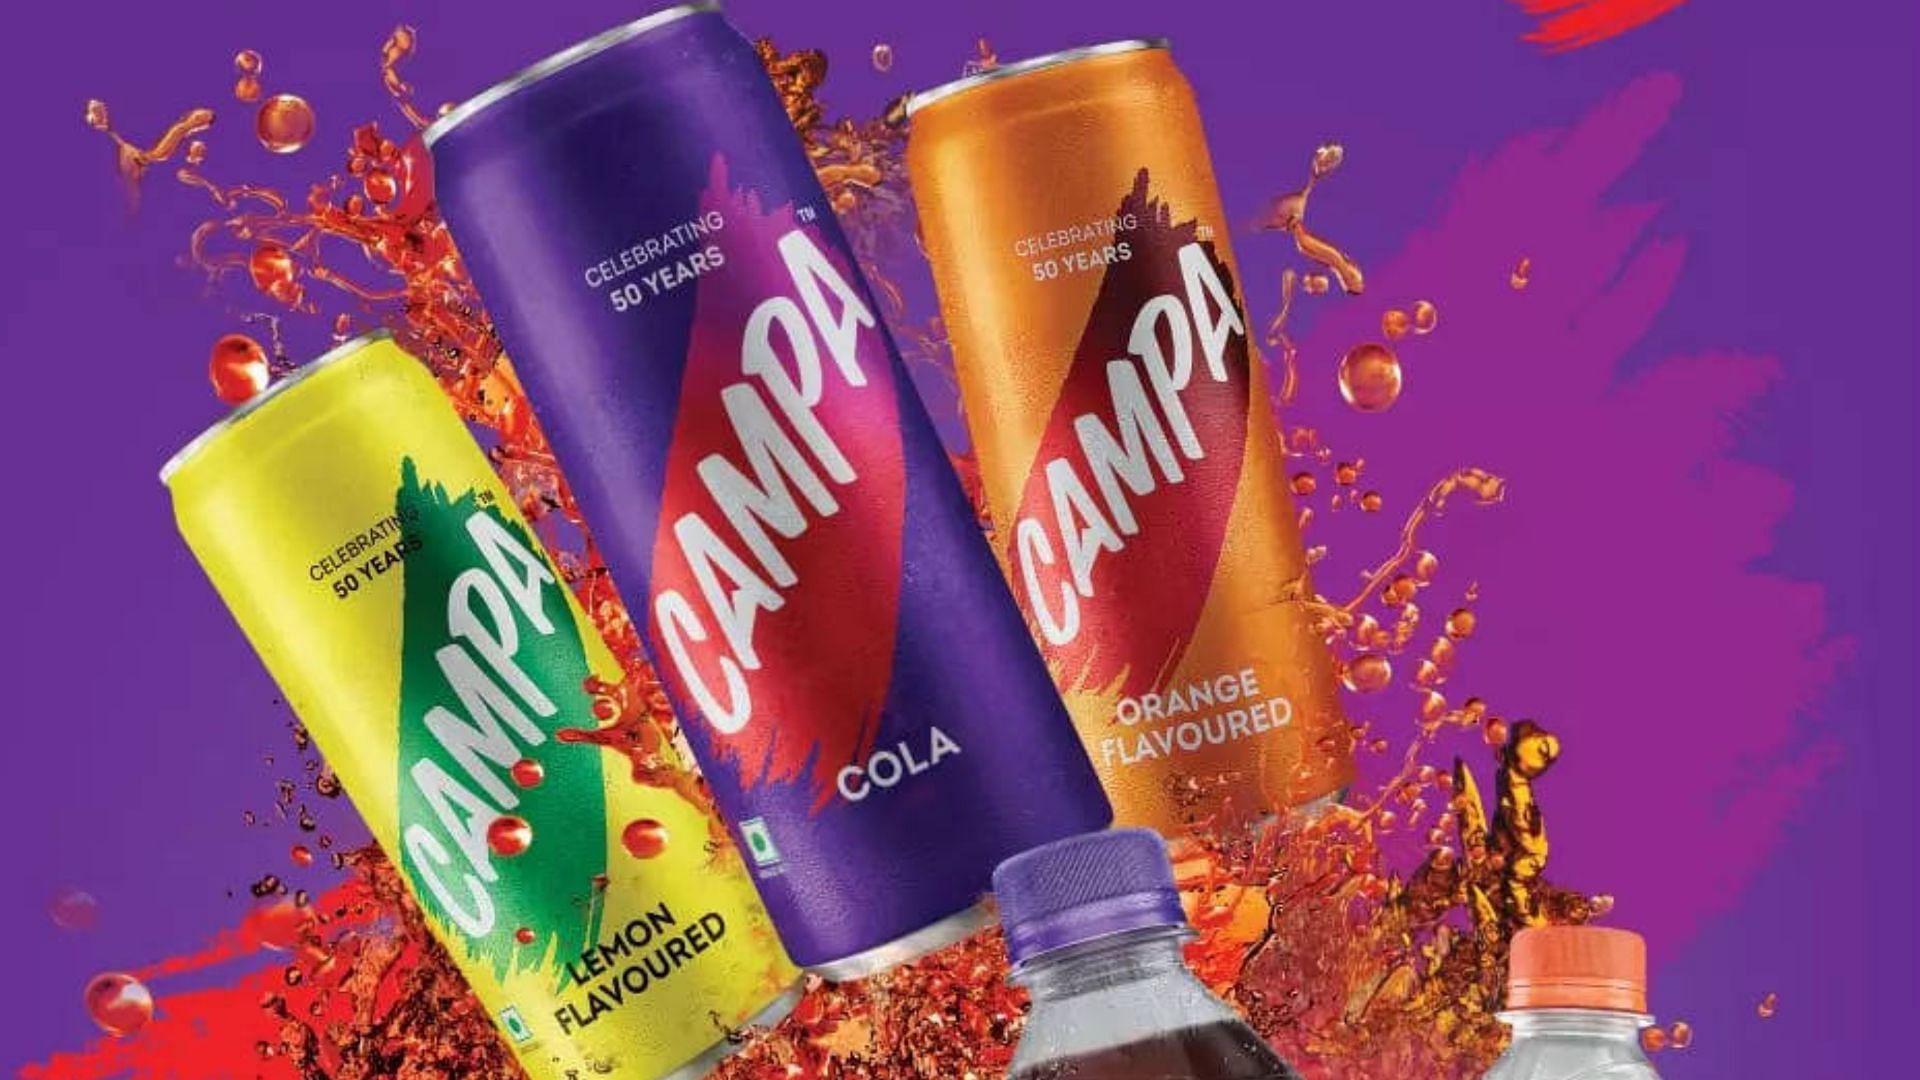 Mukesh Ambani-led Reliance Group acquired Campa from the Pure Drinks Group in August 2022, for over $2.7 million (Image via Campa Cola/Reliance Group)